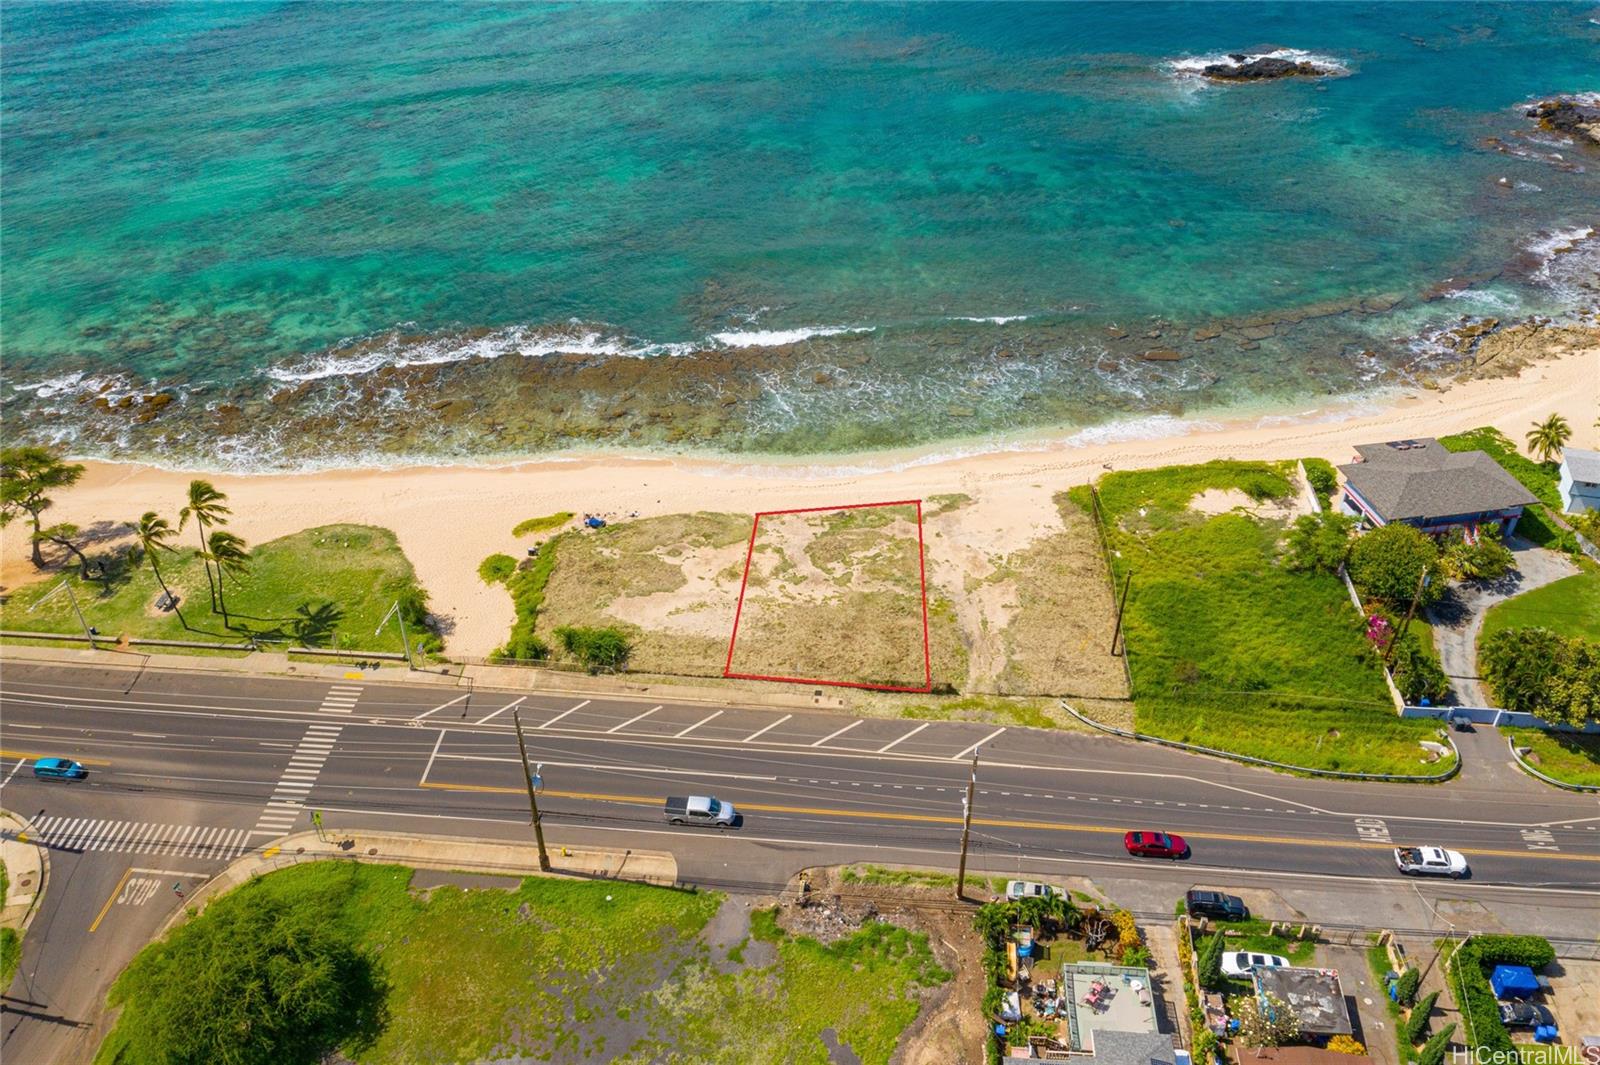 84-1103 Farrington Hwy  Waianae, Hi vacant land for sale - photo 16 of 23